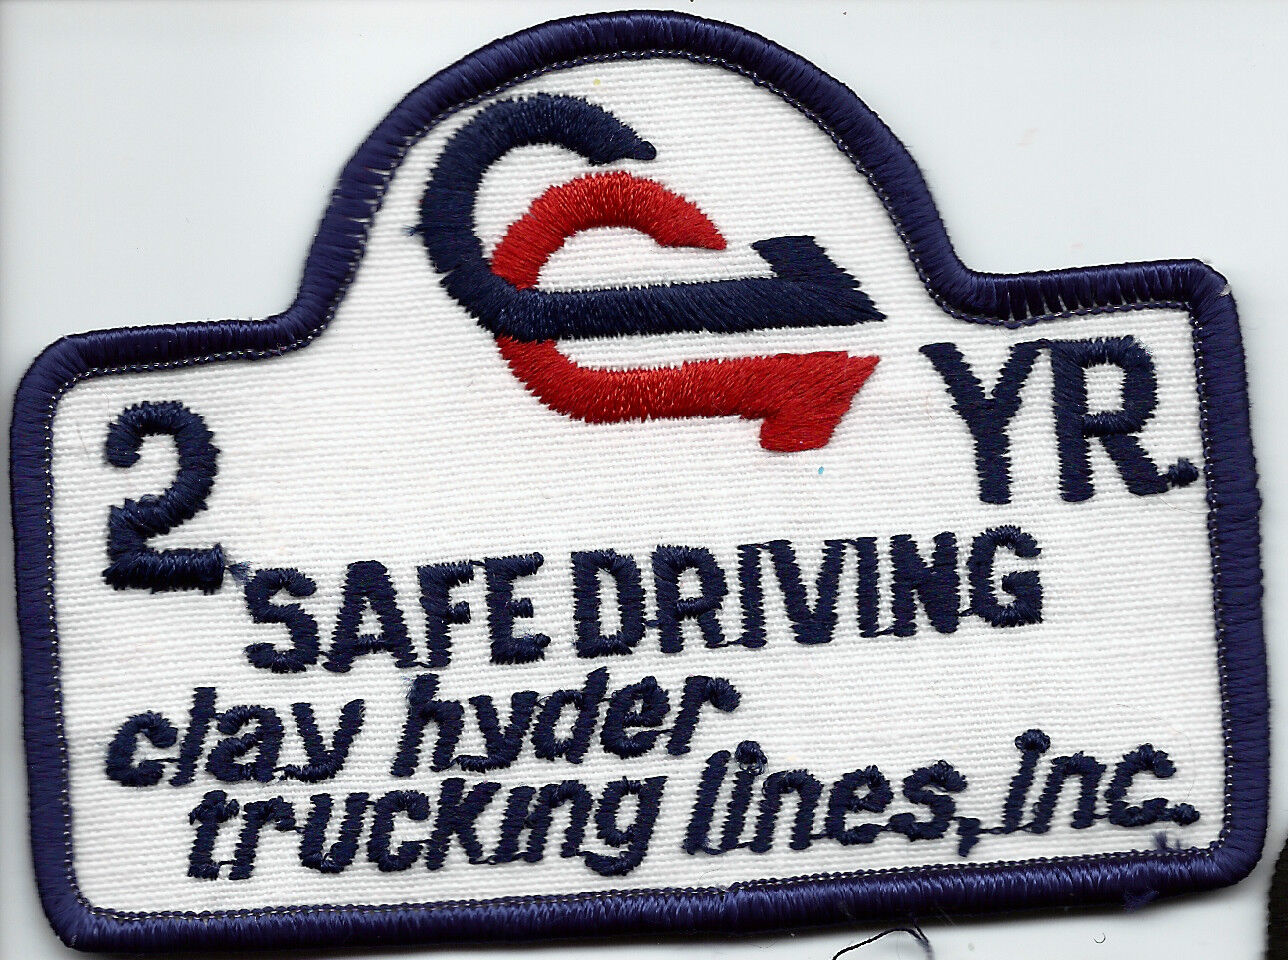 Clay Hyder Trucking lines, Inc. 2 year safe driving patch 3 X 4-1/4 inch #7446